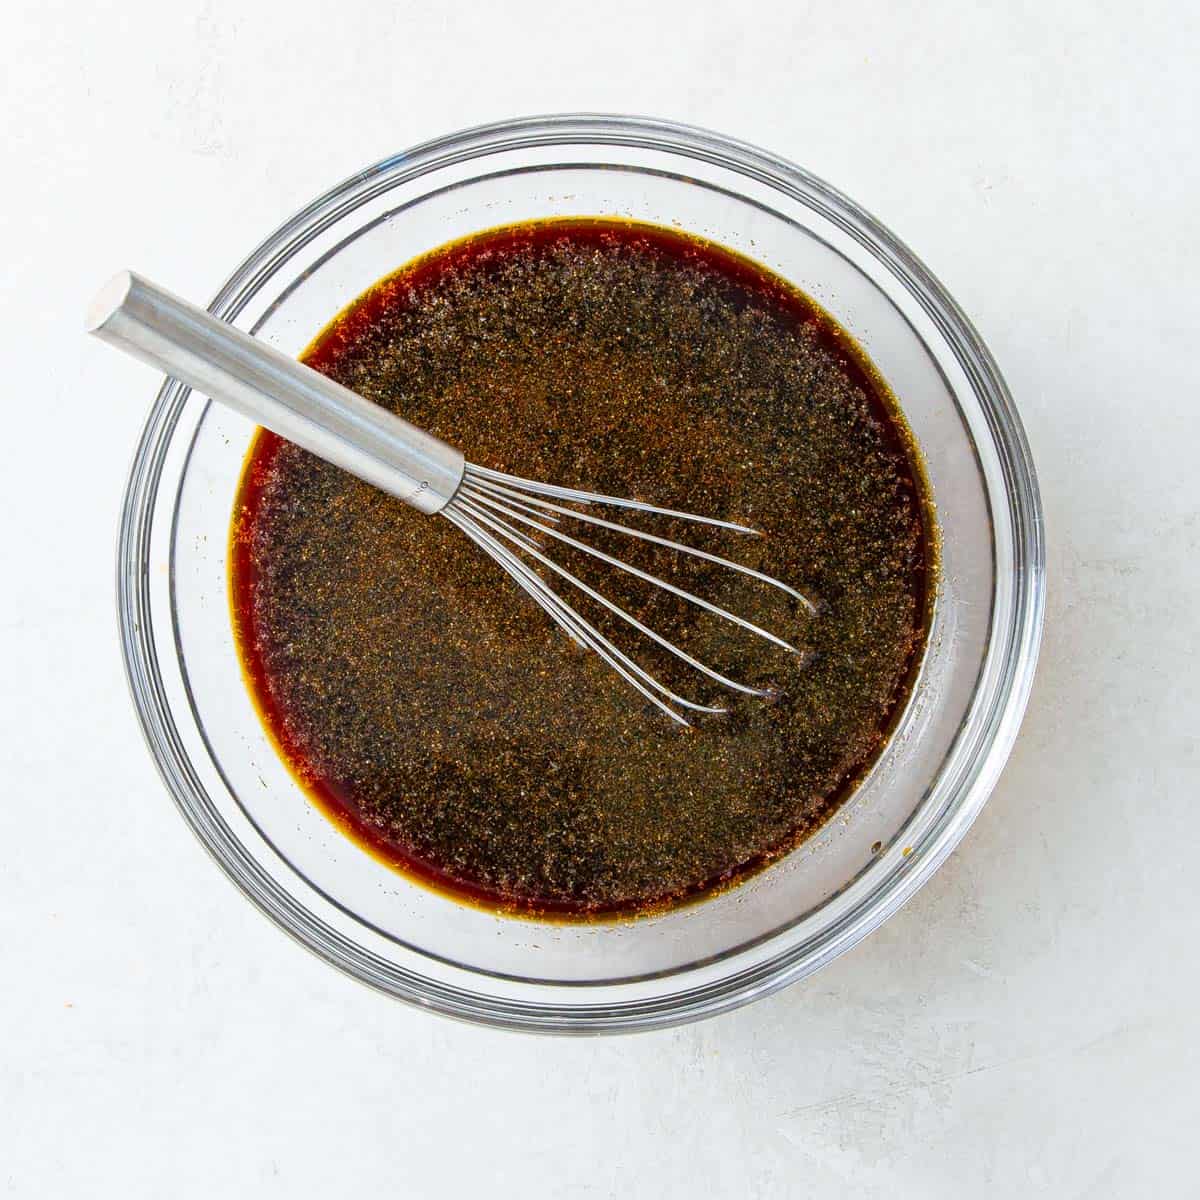 A bowl of marinade for injecting into a boneless prime rib.